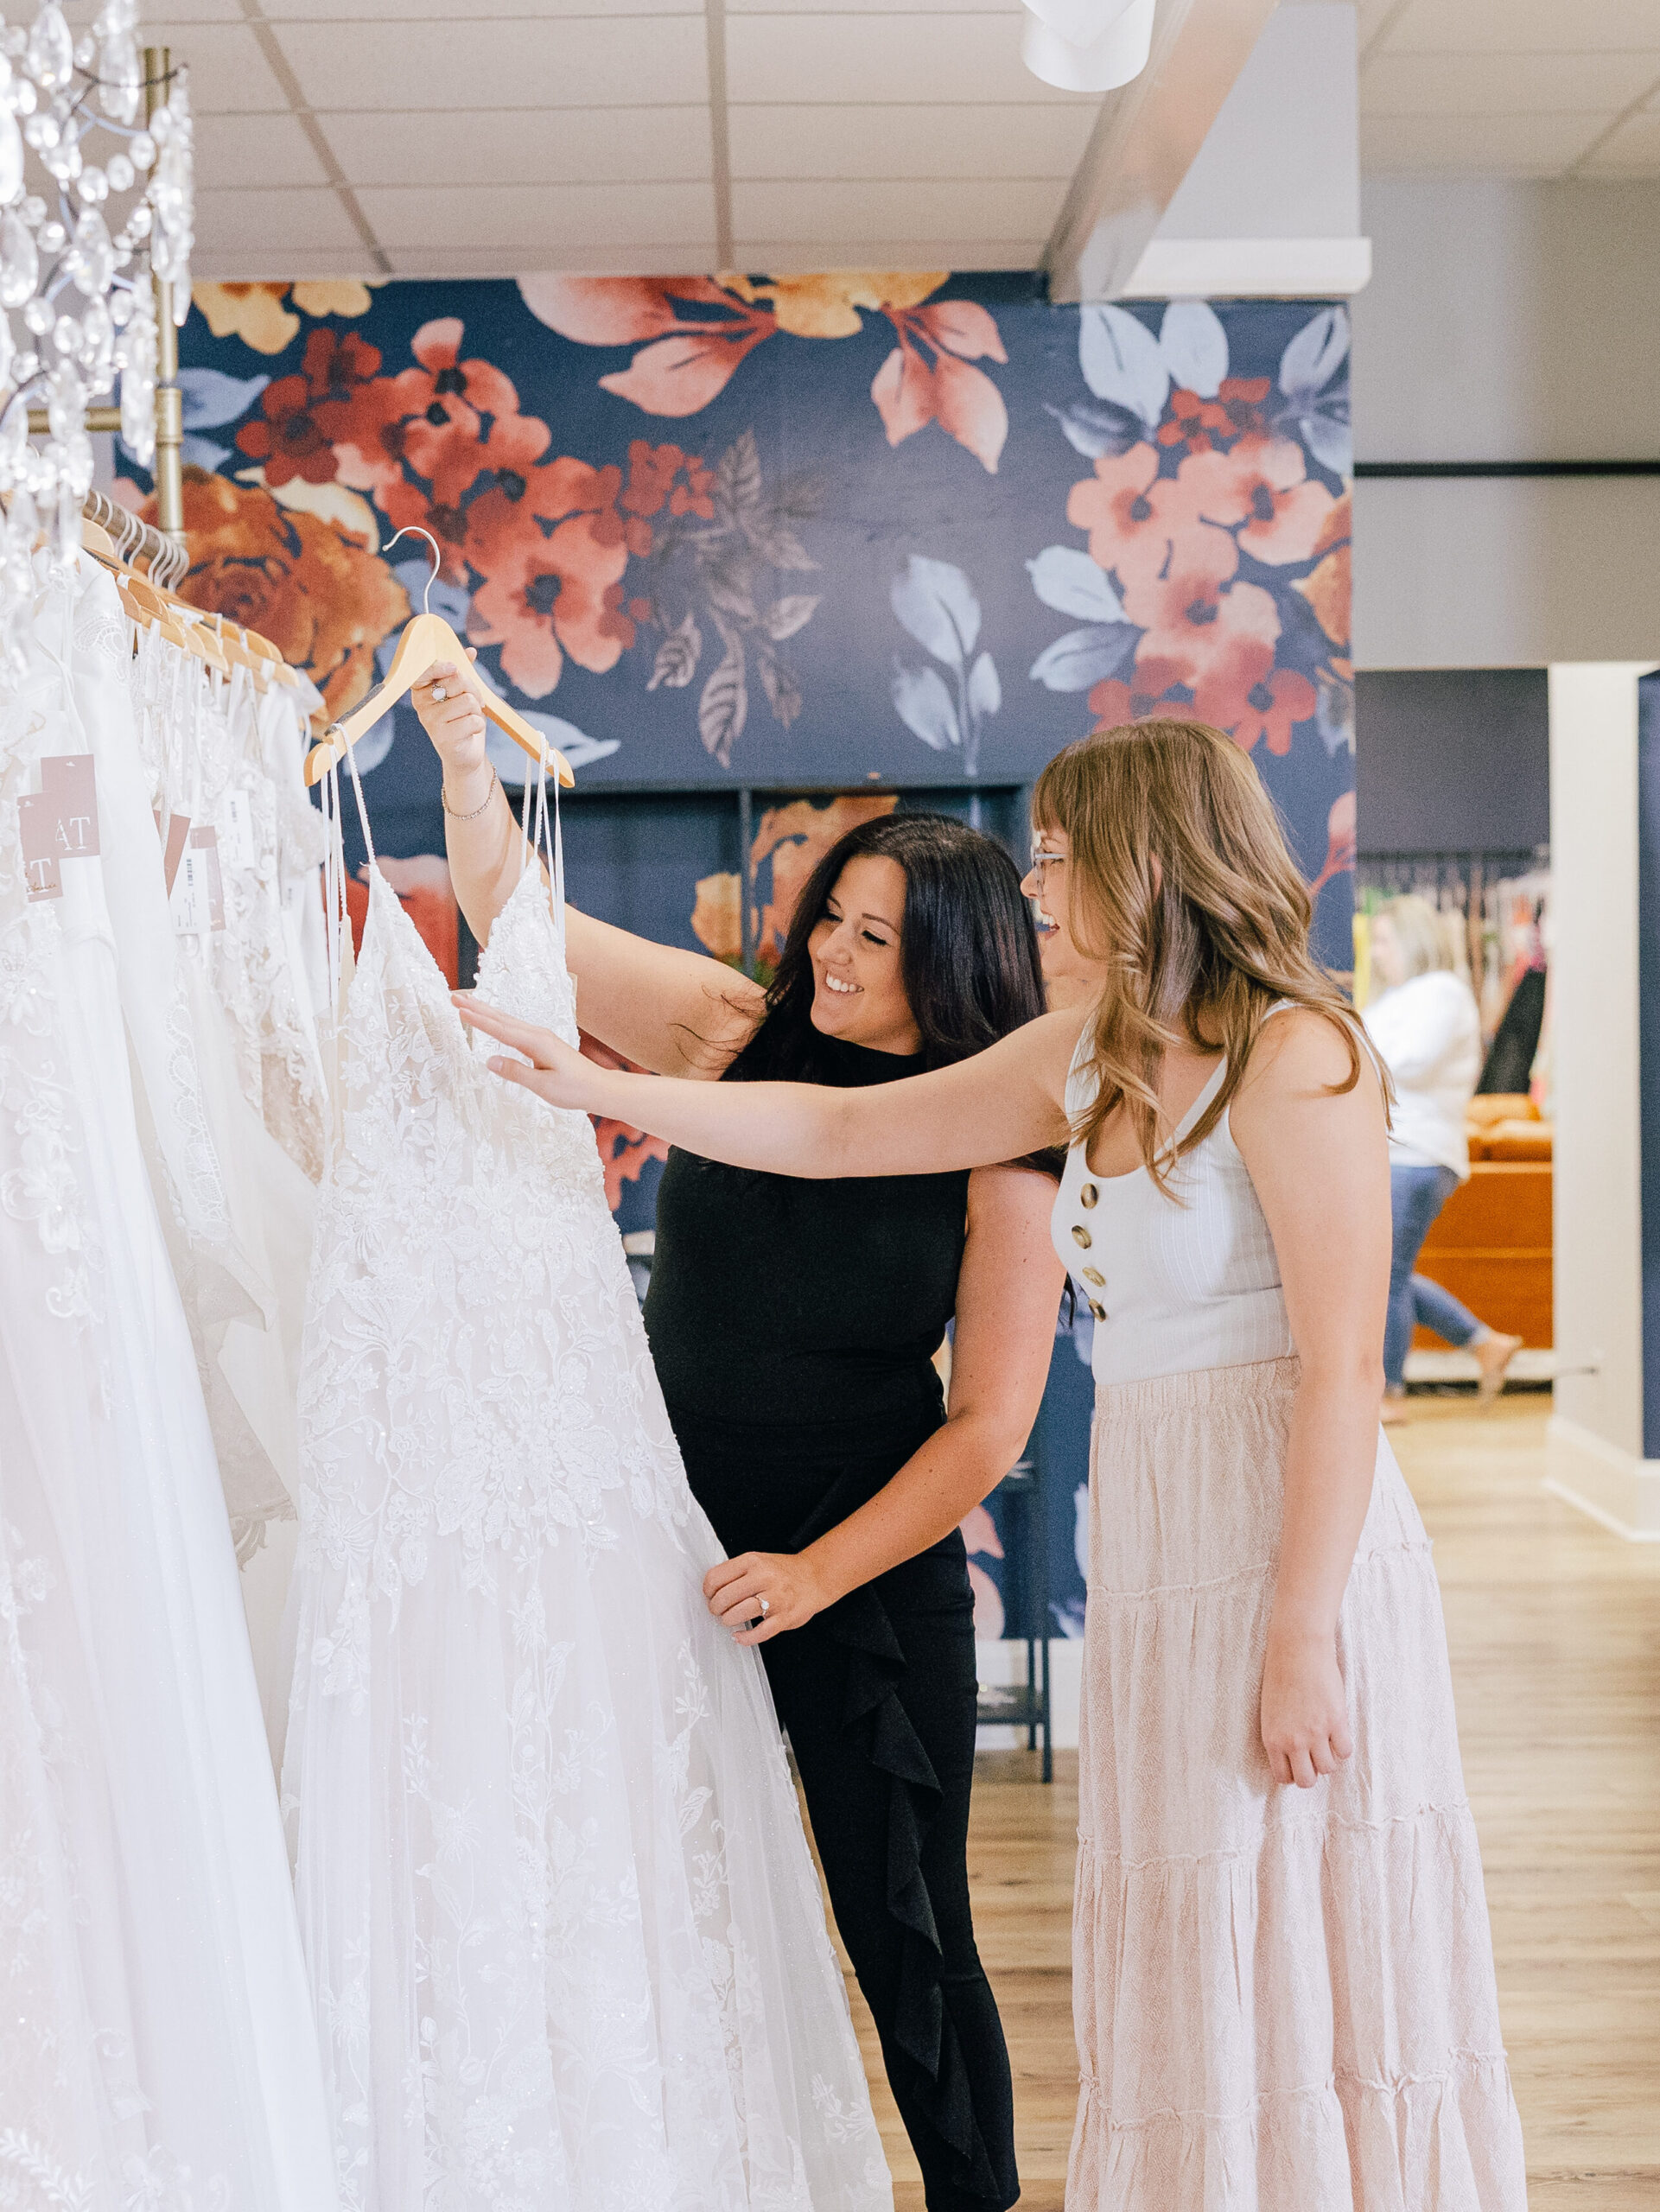 stylist and bride to be shopping for bridal dresses